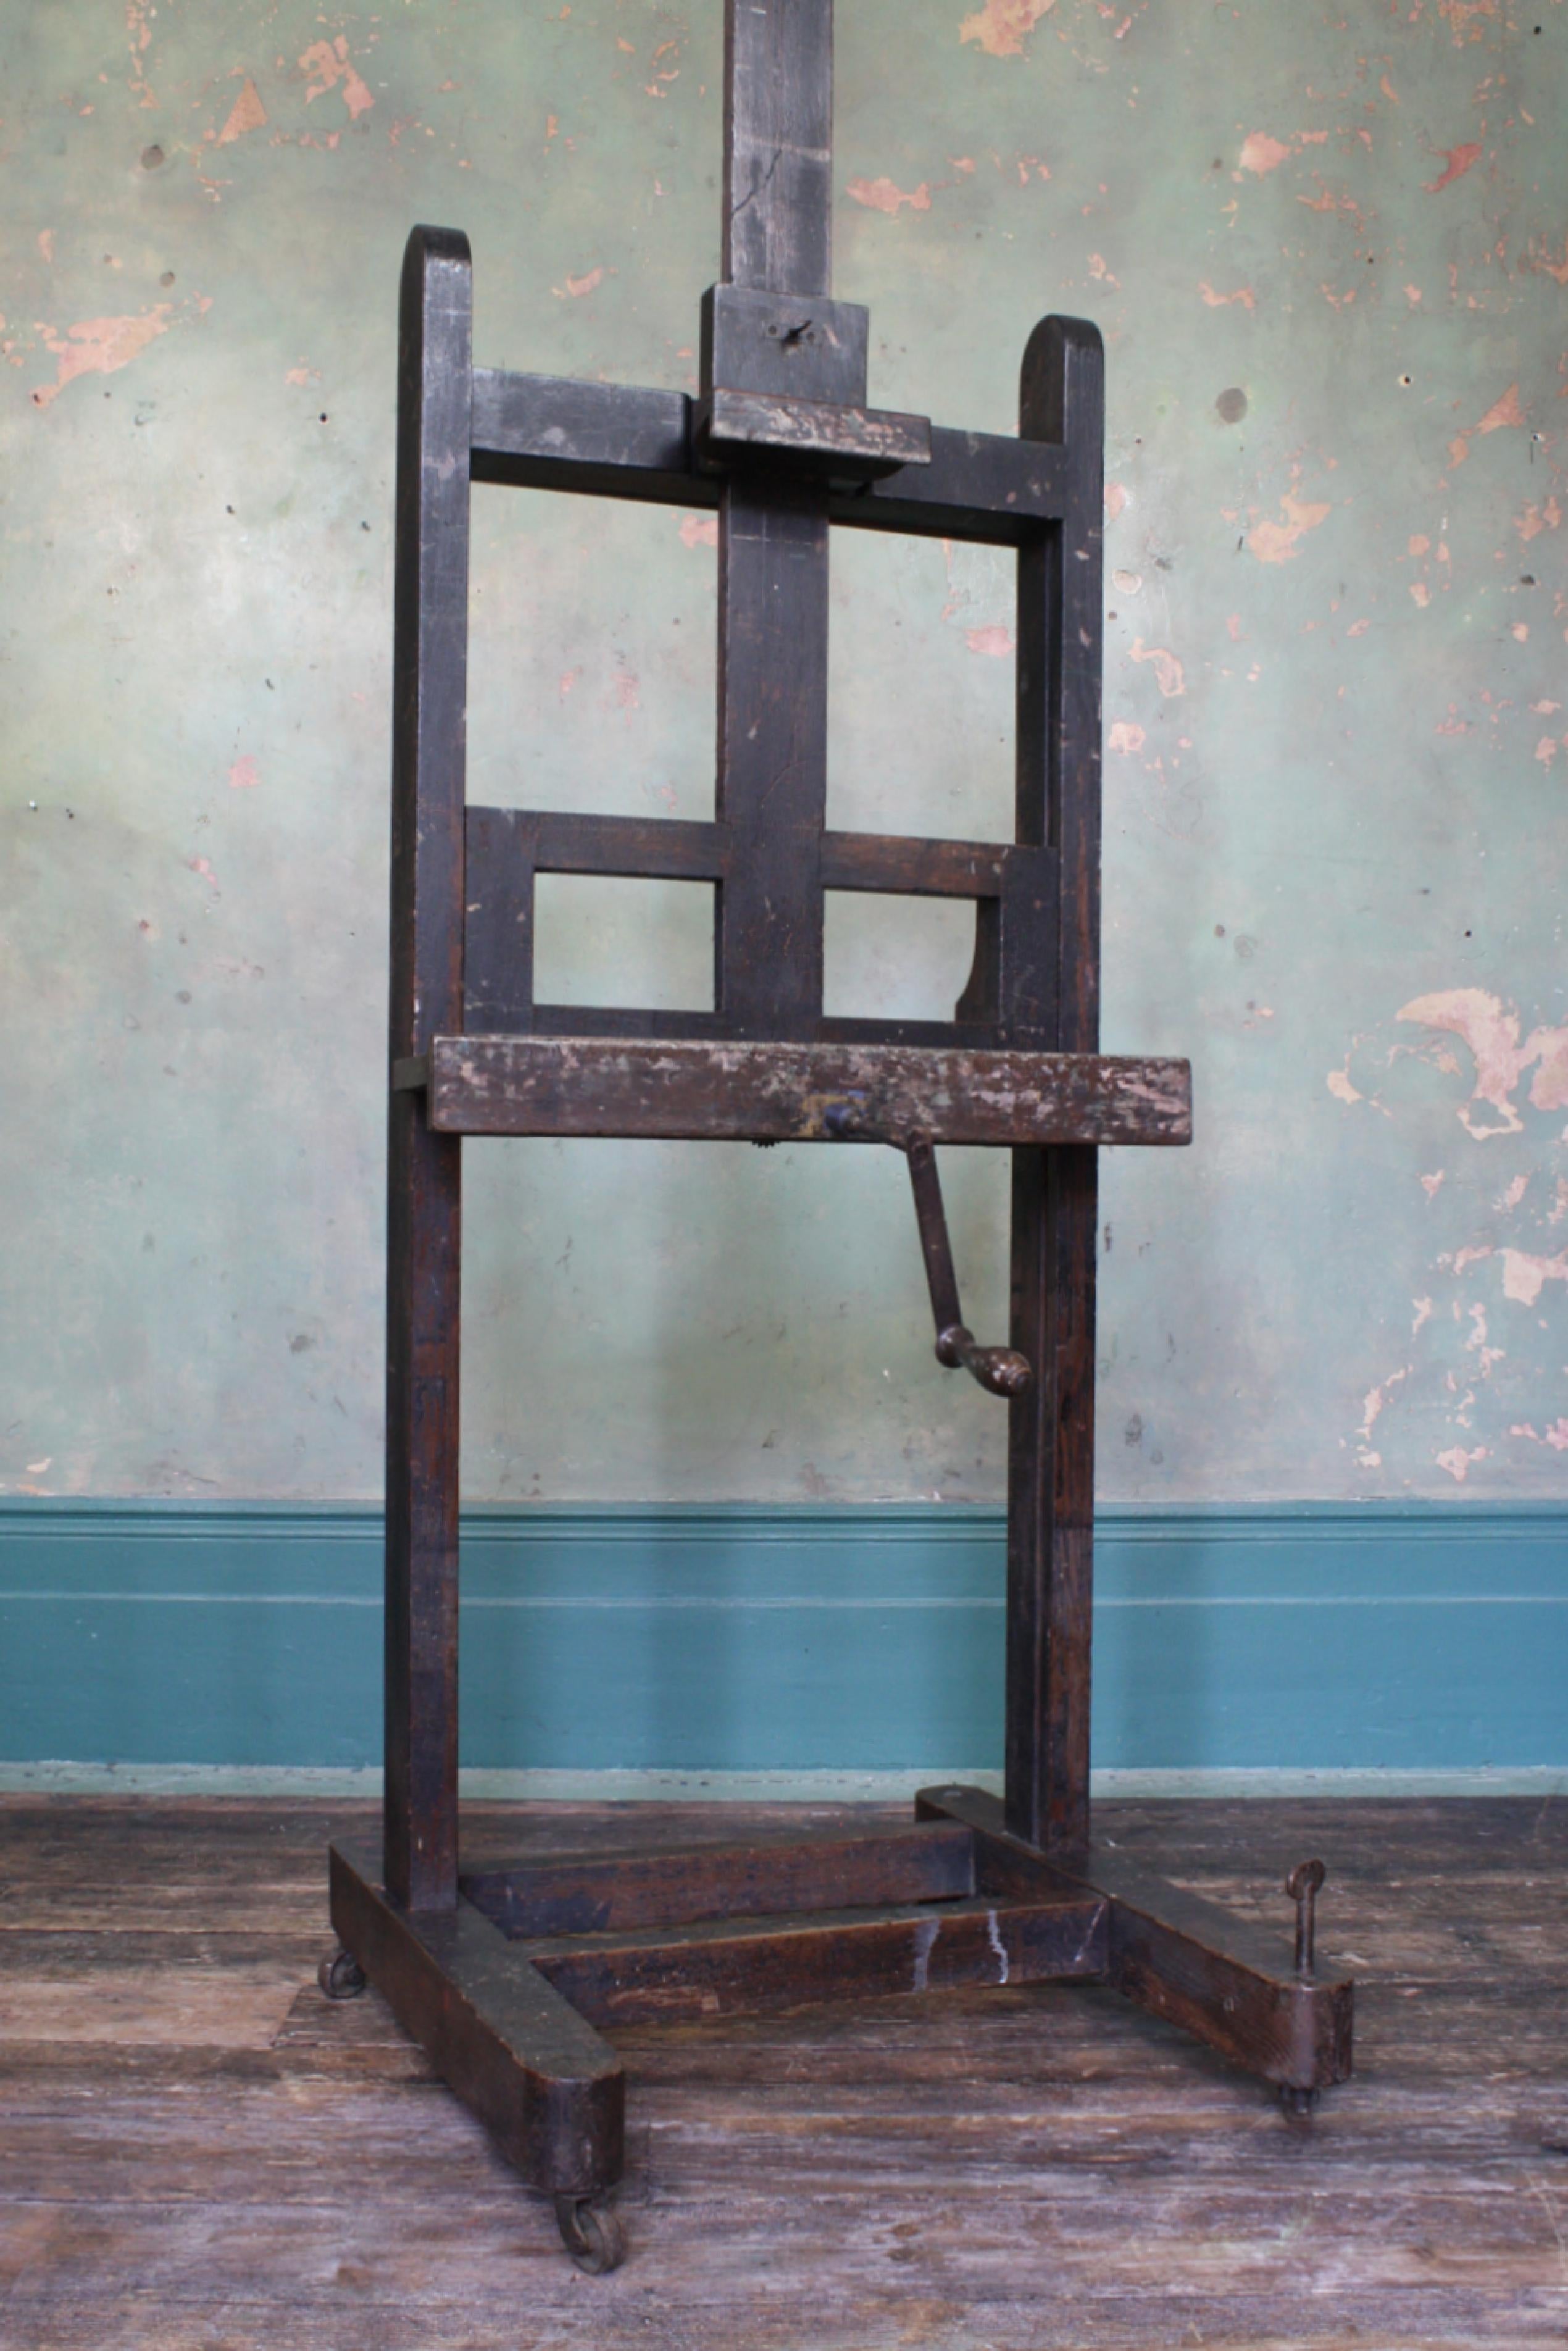 A large mid to late 19th century Lechetier Barbe & Co hand cranked artist studio easel

Provenance, the studio easel was the property of Hugh Richard Hosking known as Dick Hosking (1904-91). Dick trained as a mural painter at the Royal College of